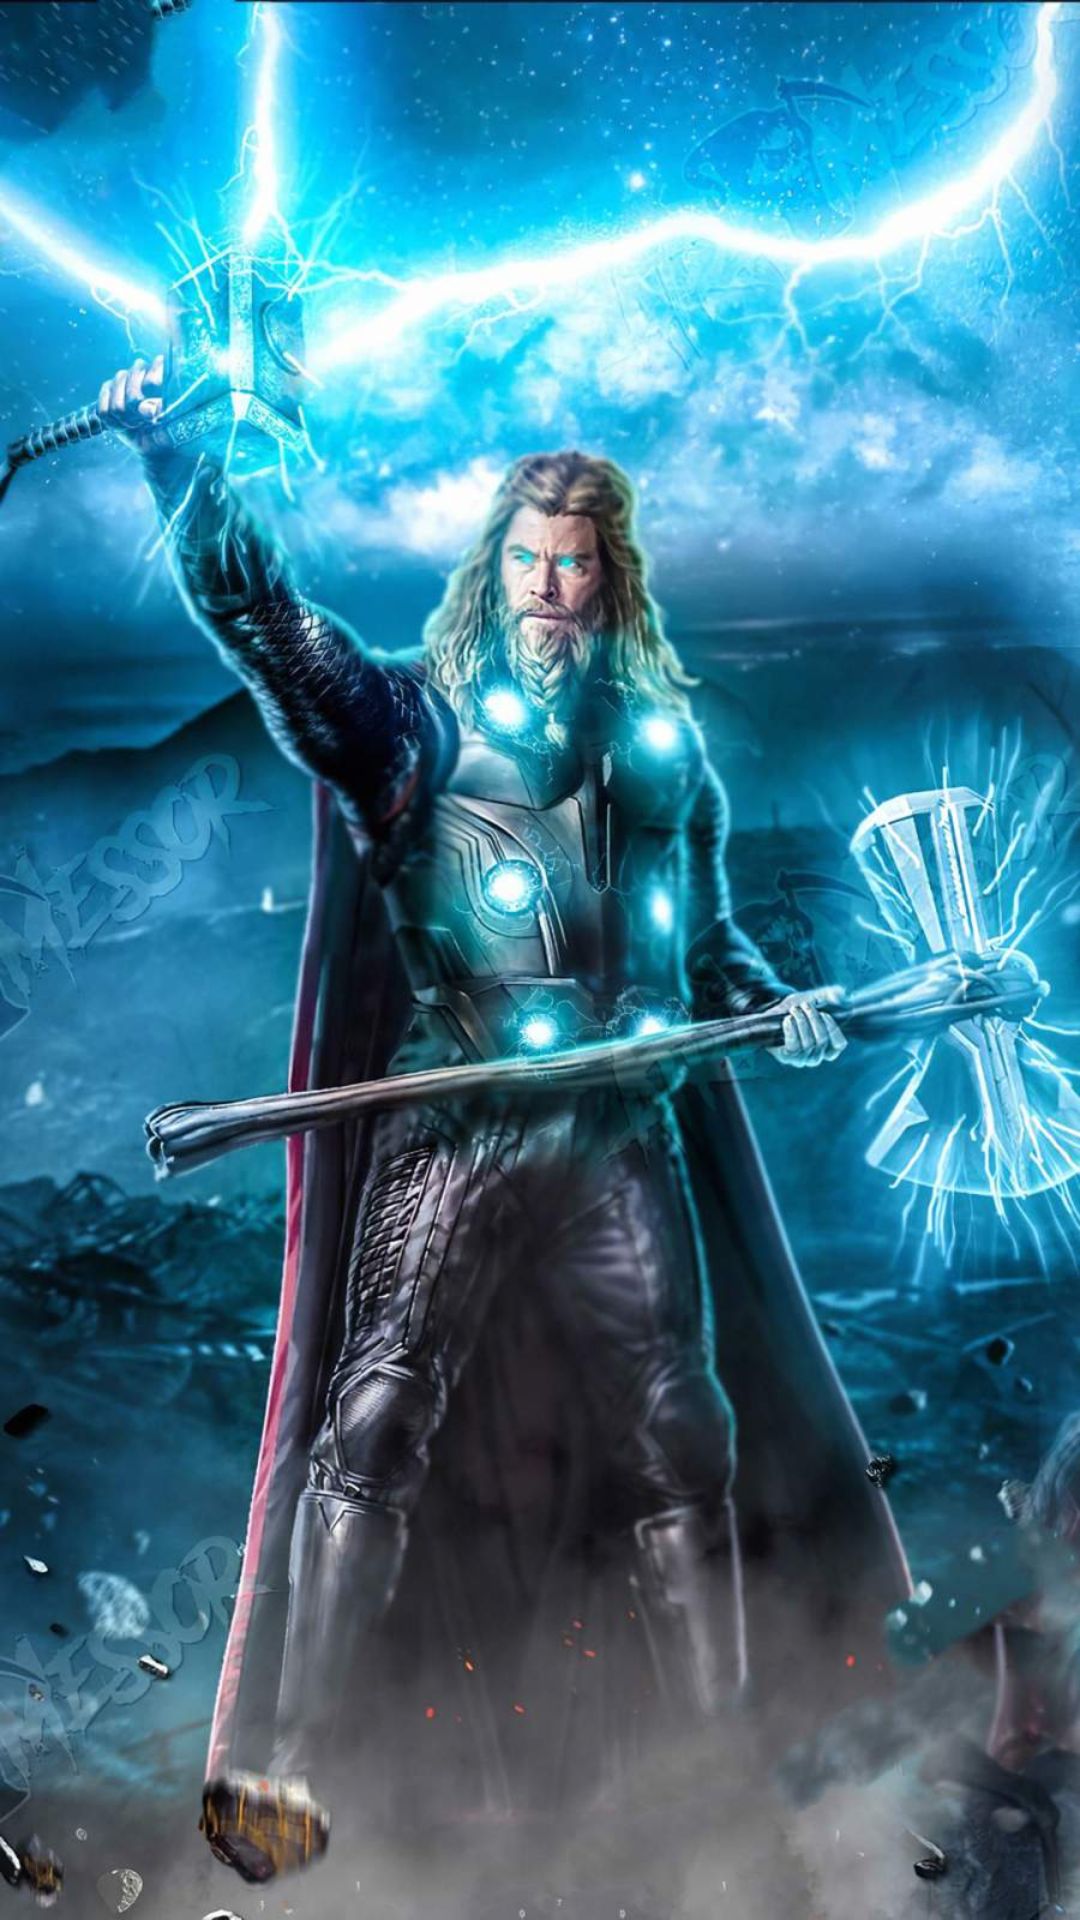 35+ Best Thor HD Wallpapers [ Ultra HD ]